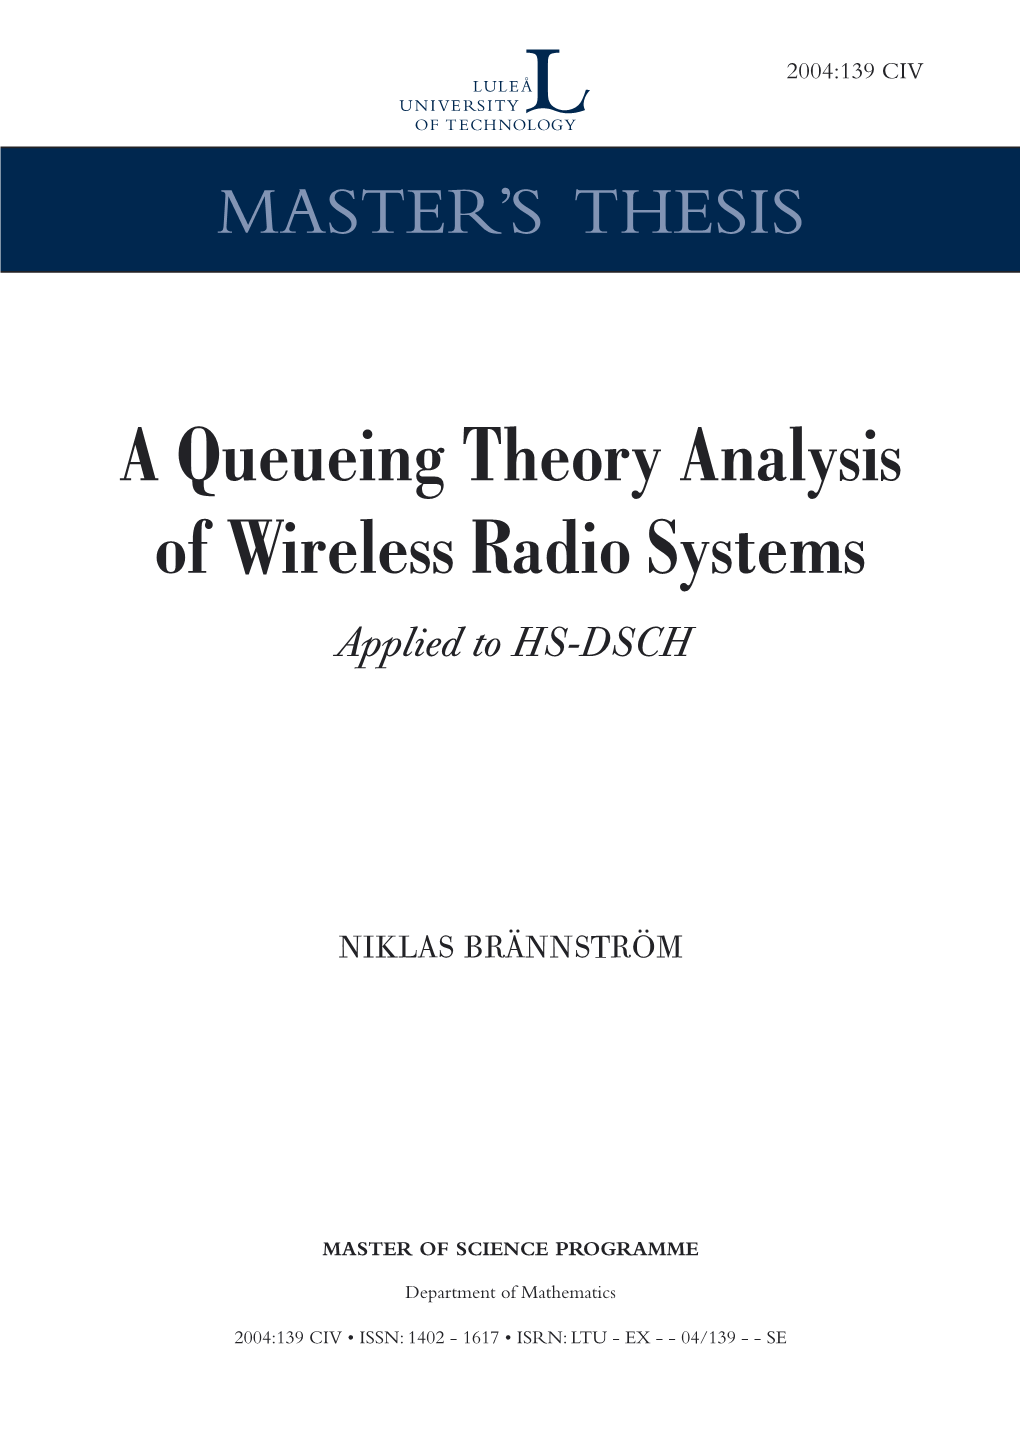 A Queueing Theory Analysis of Wireless Radio Systems Applied to HS-DSCH